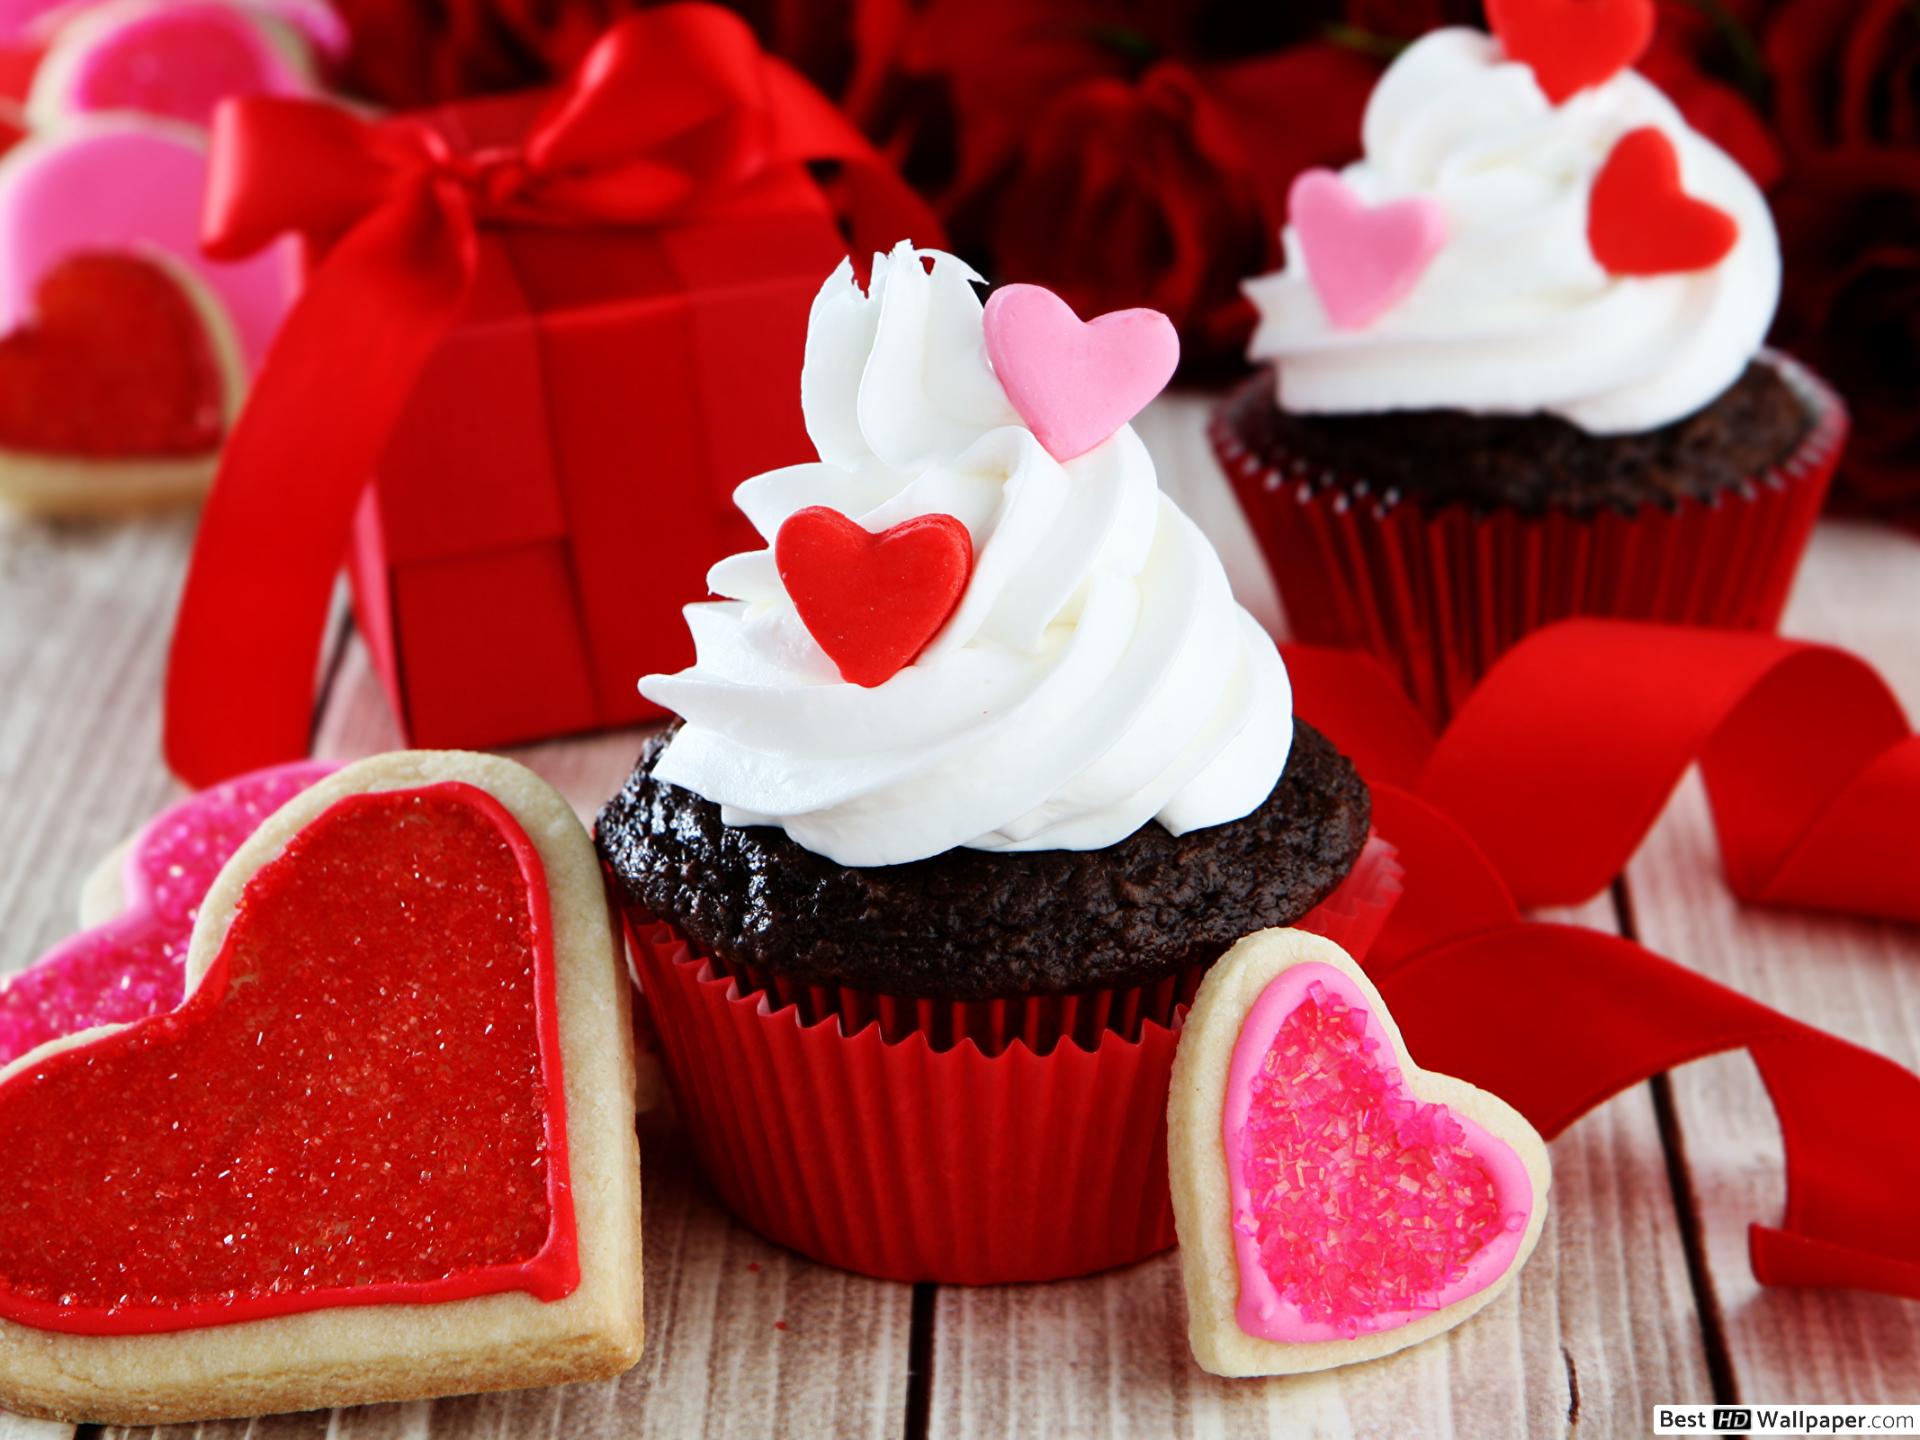 Valentine's day and the heart cookies HD wallpaper download